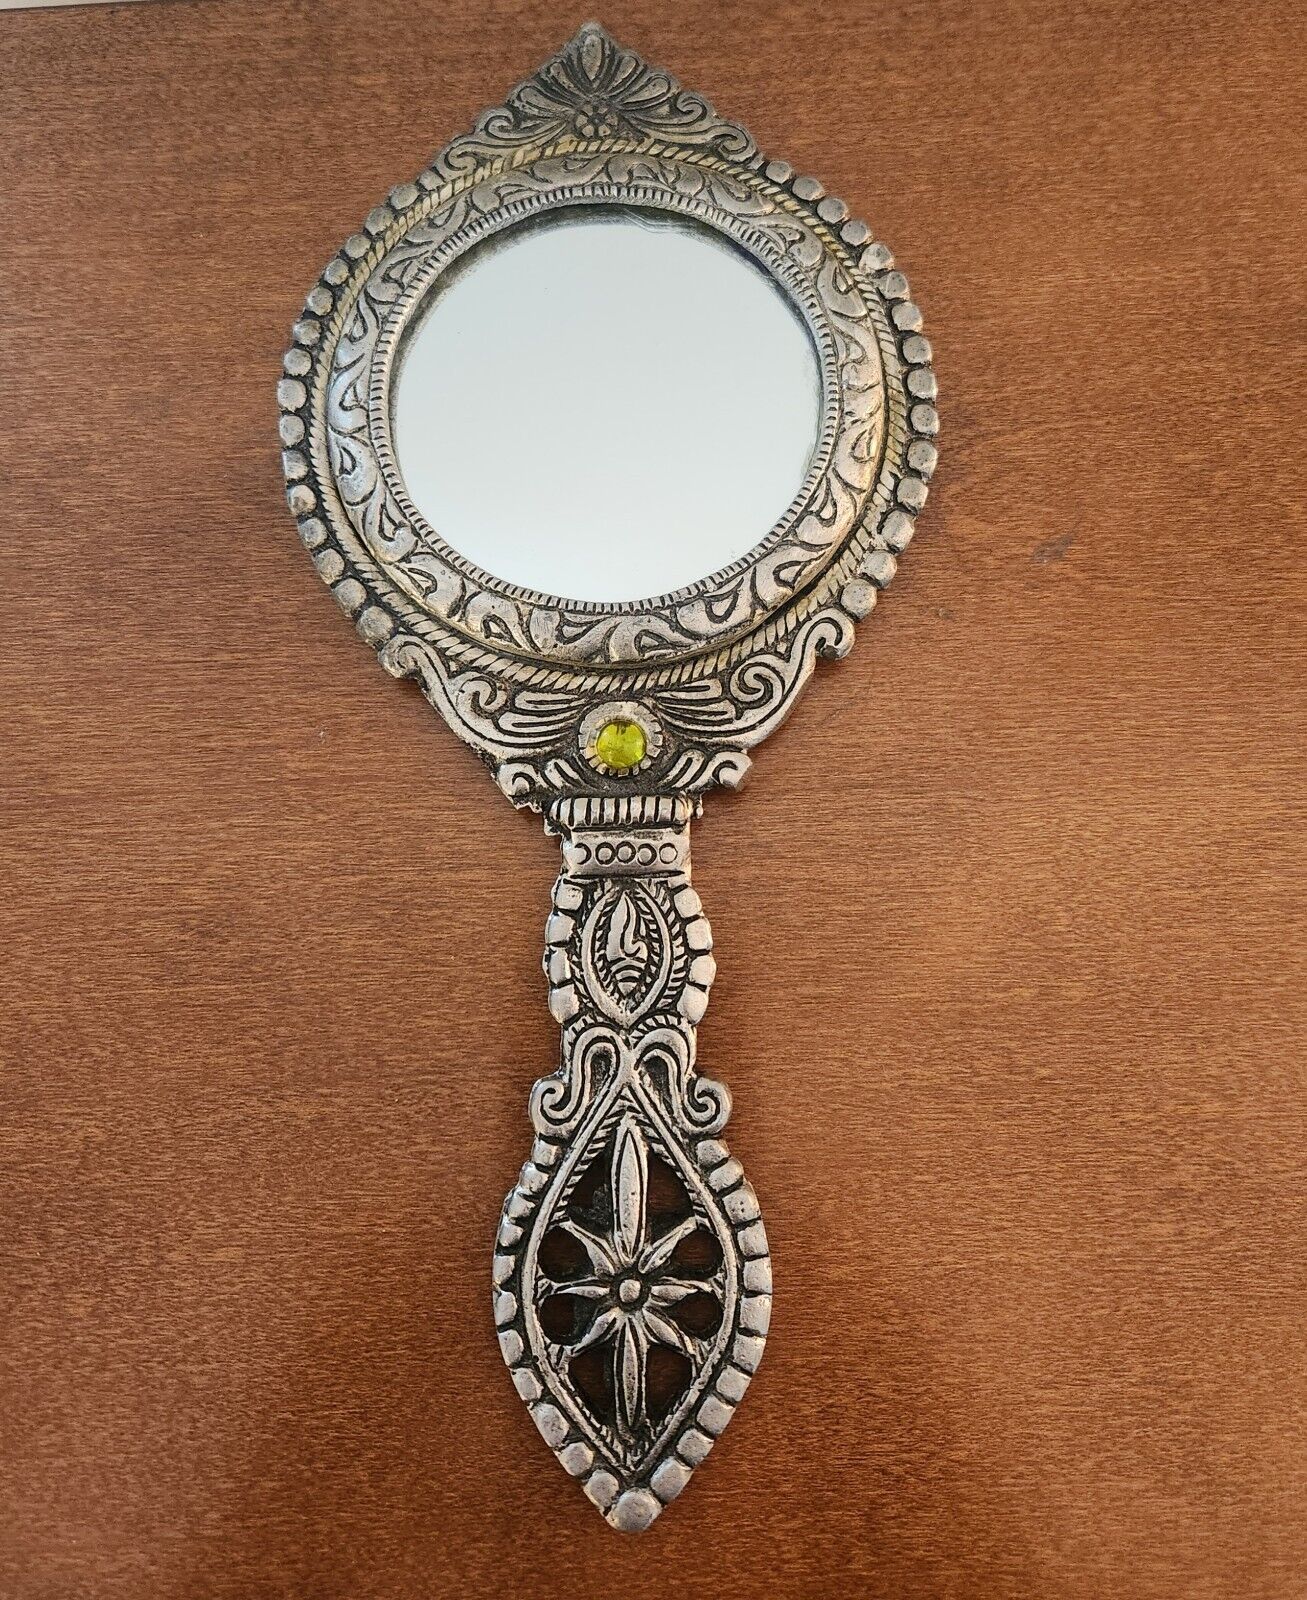 Hand Mirror Two-sided Round Shape Carved Silver Plated Metal W/ Green Jewels